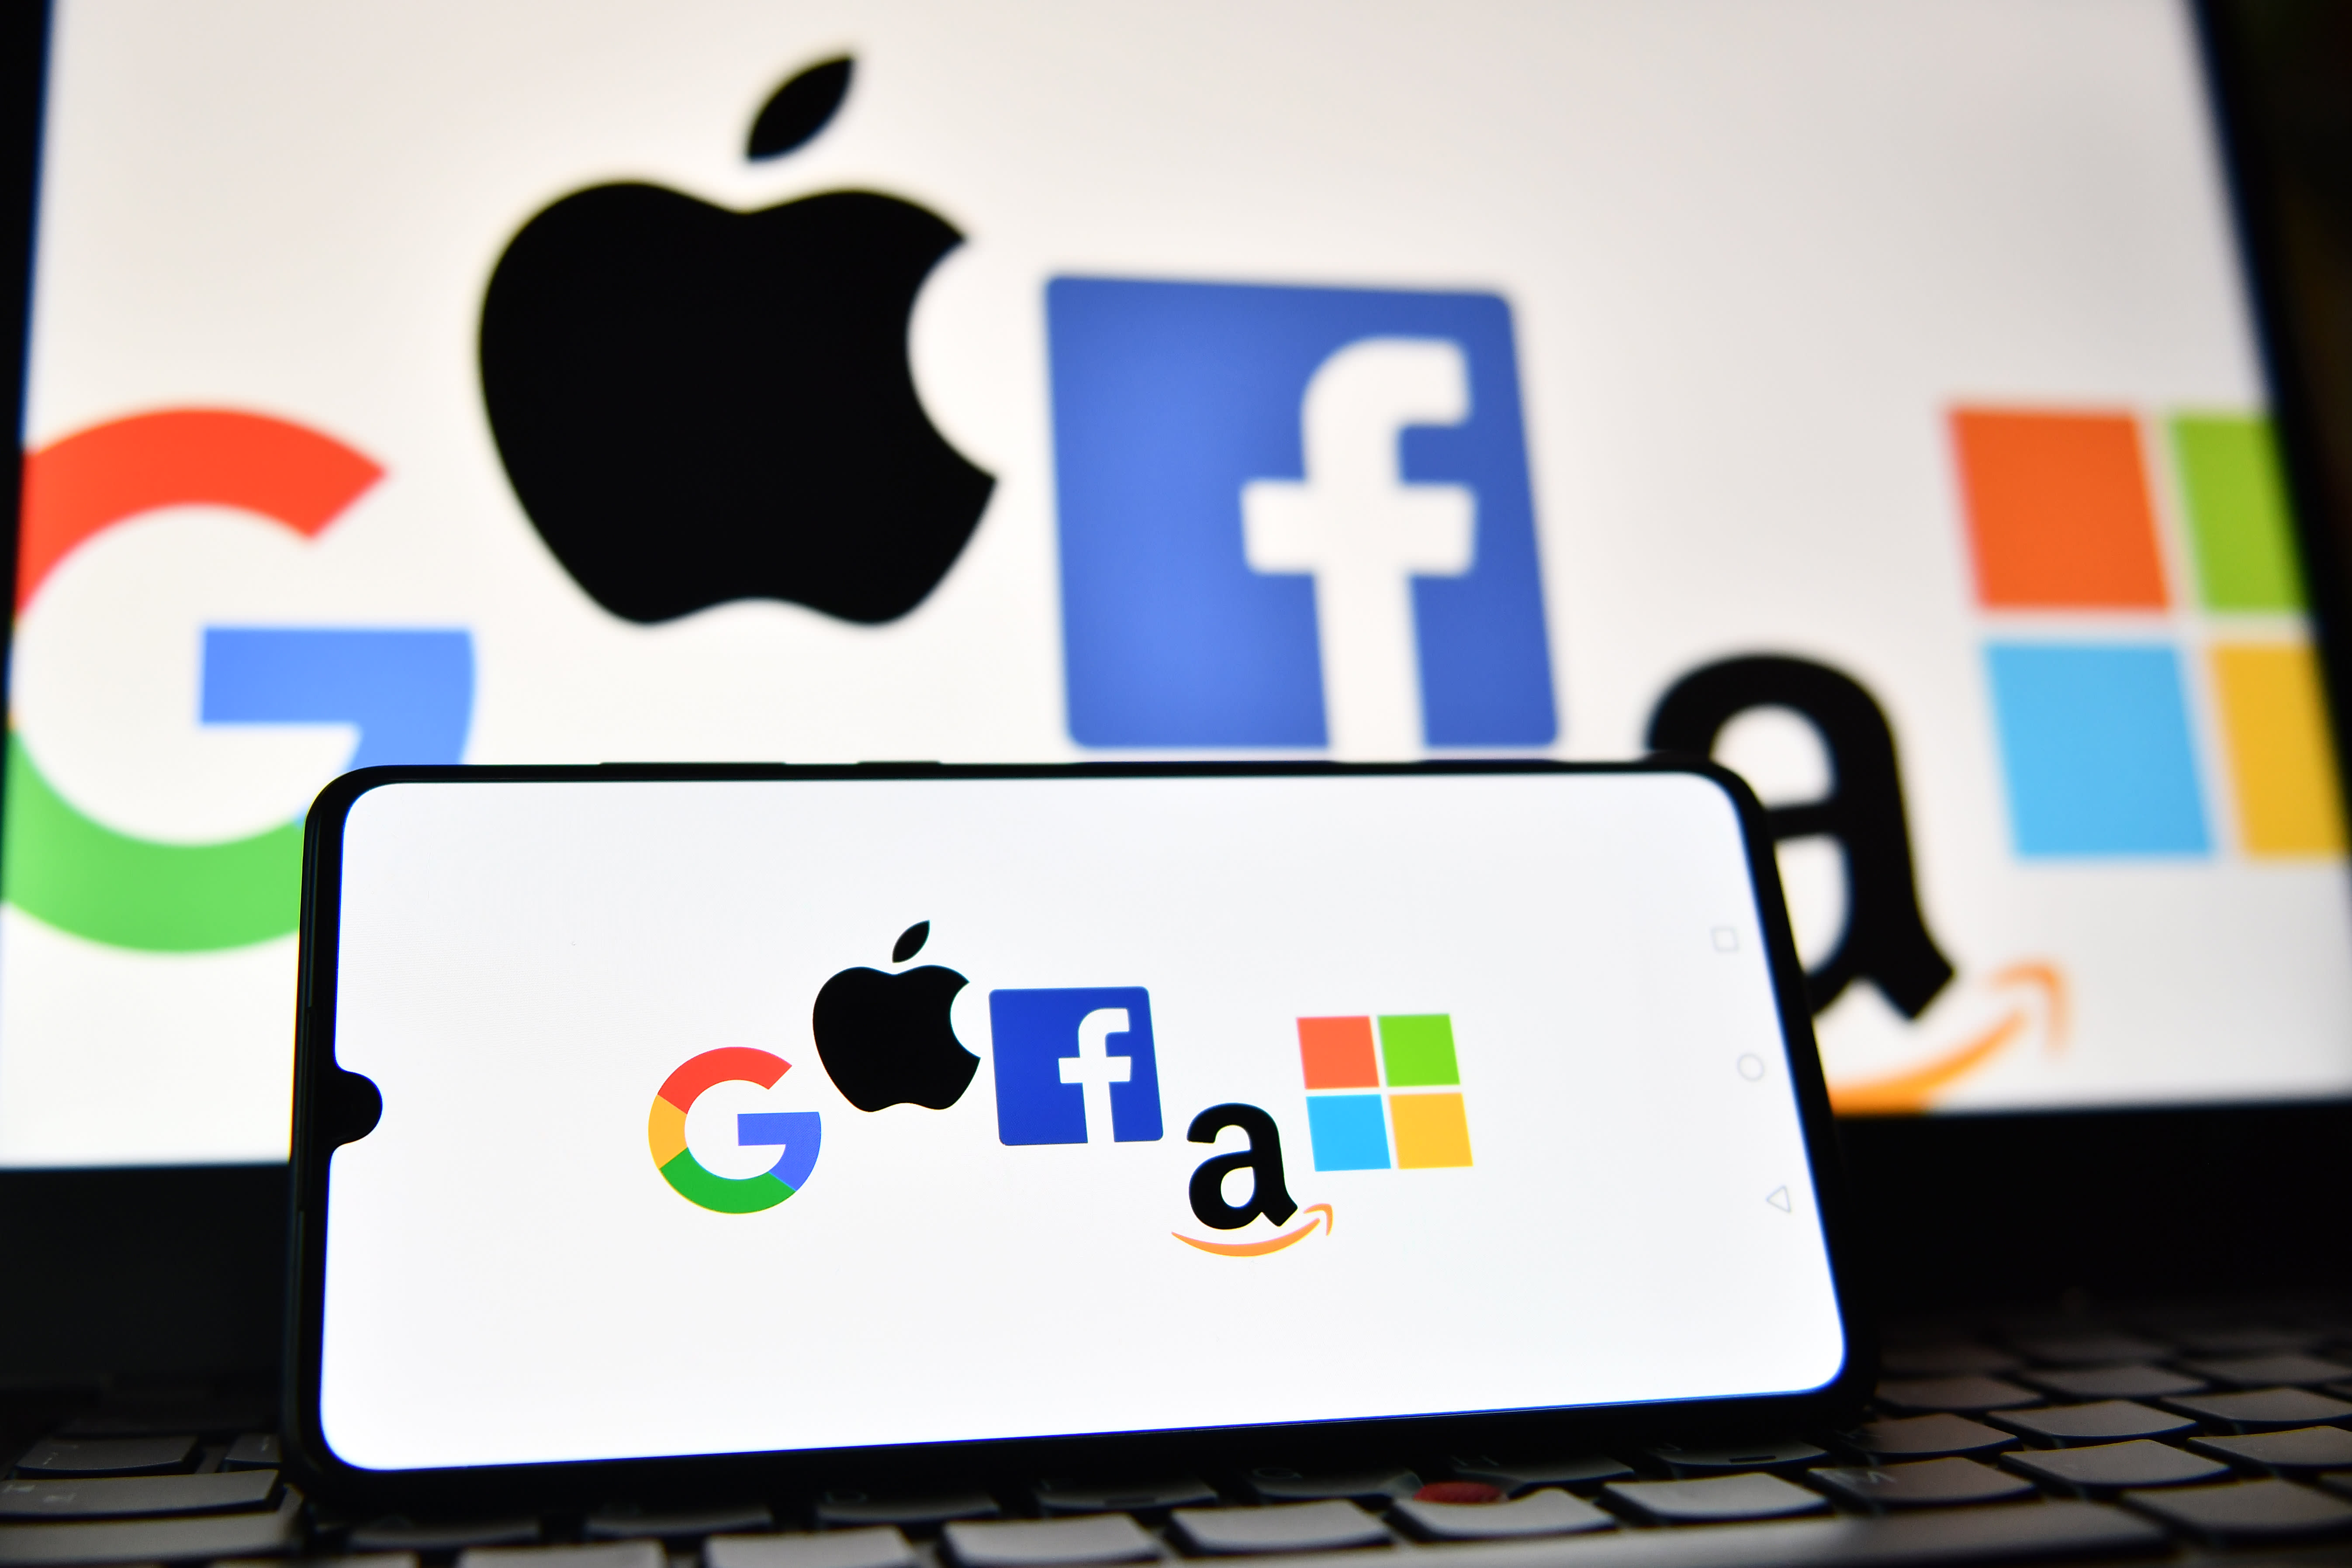 Investors have been fleeing Big Tech for 'old economy' stocks. Here’s what it means for our holdings